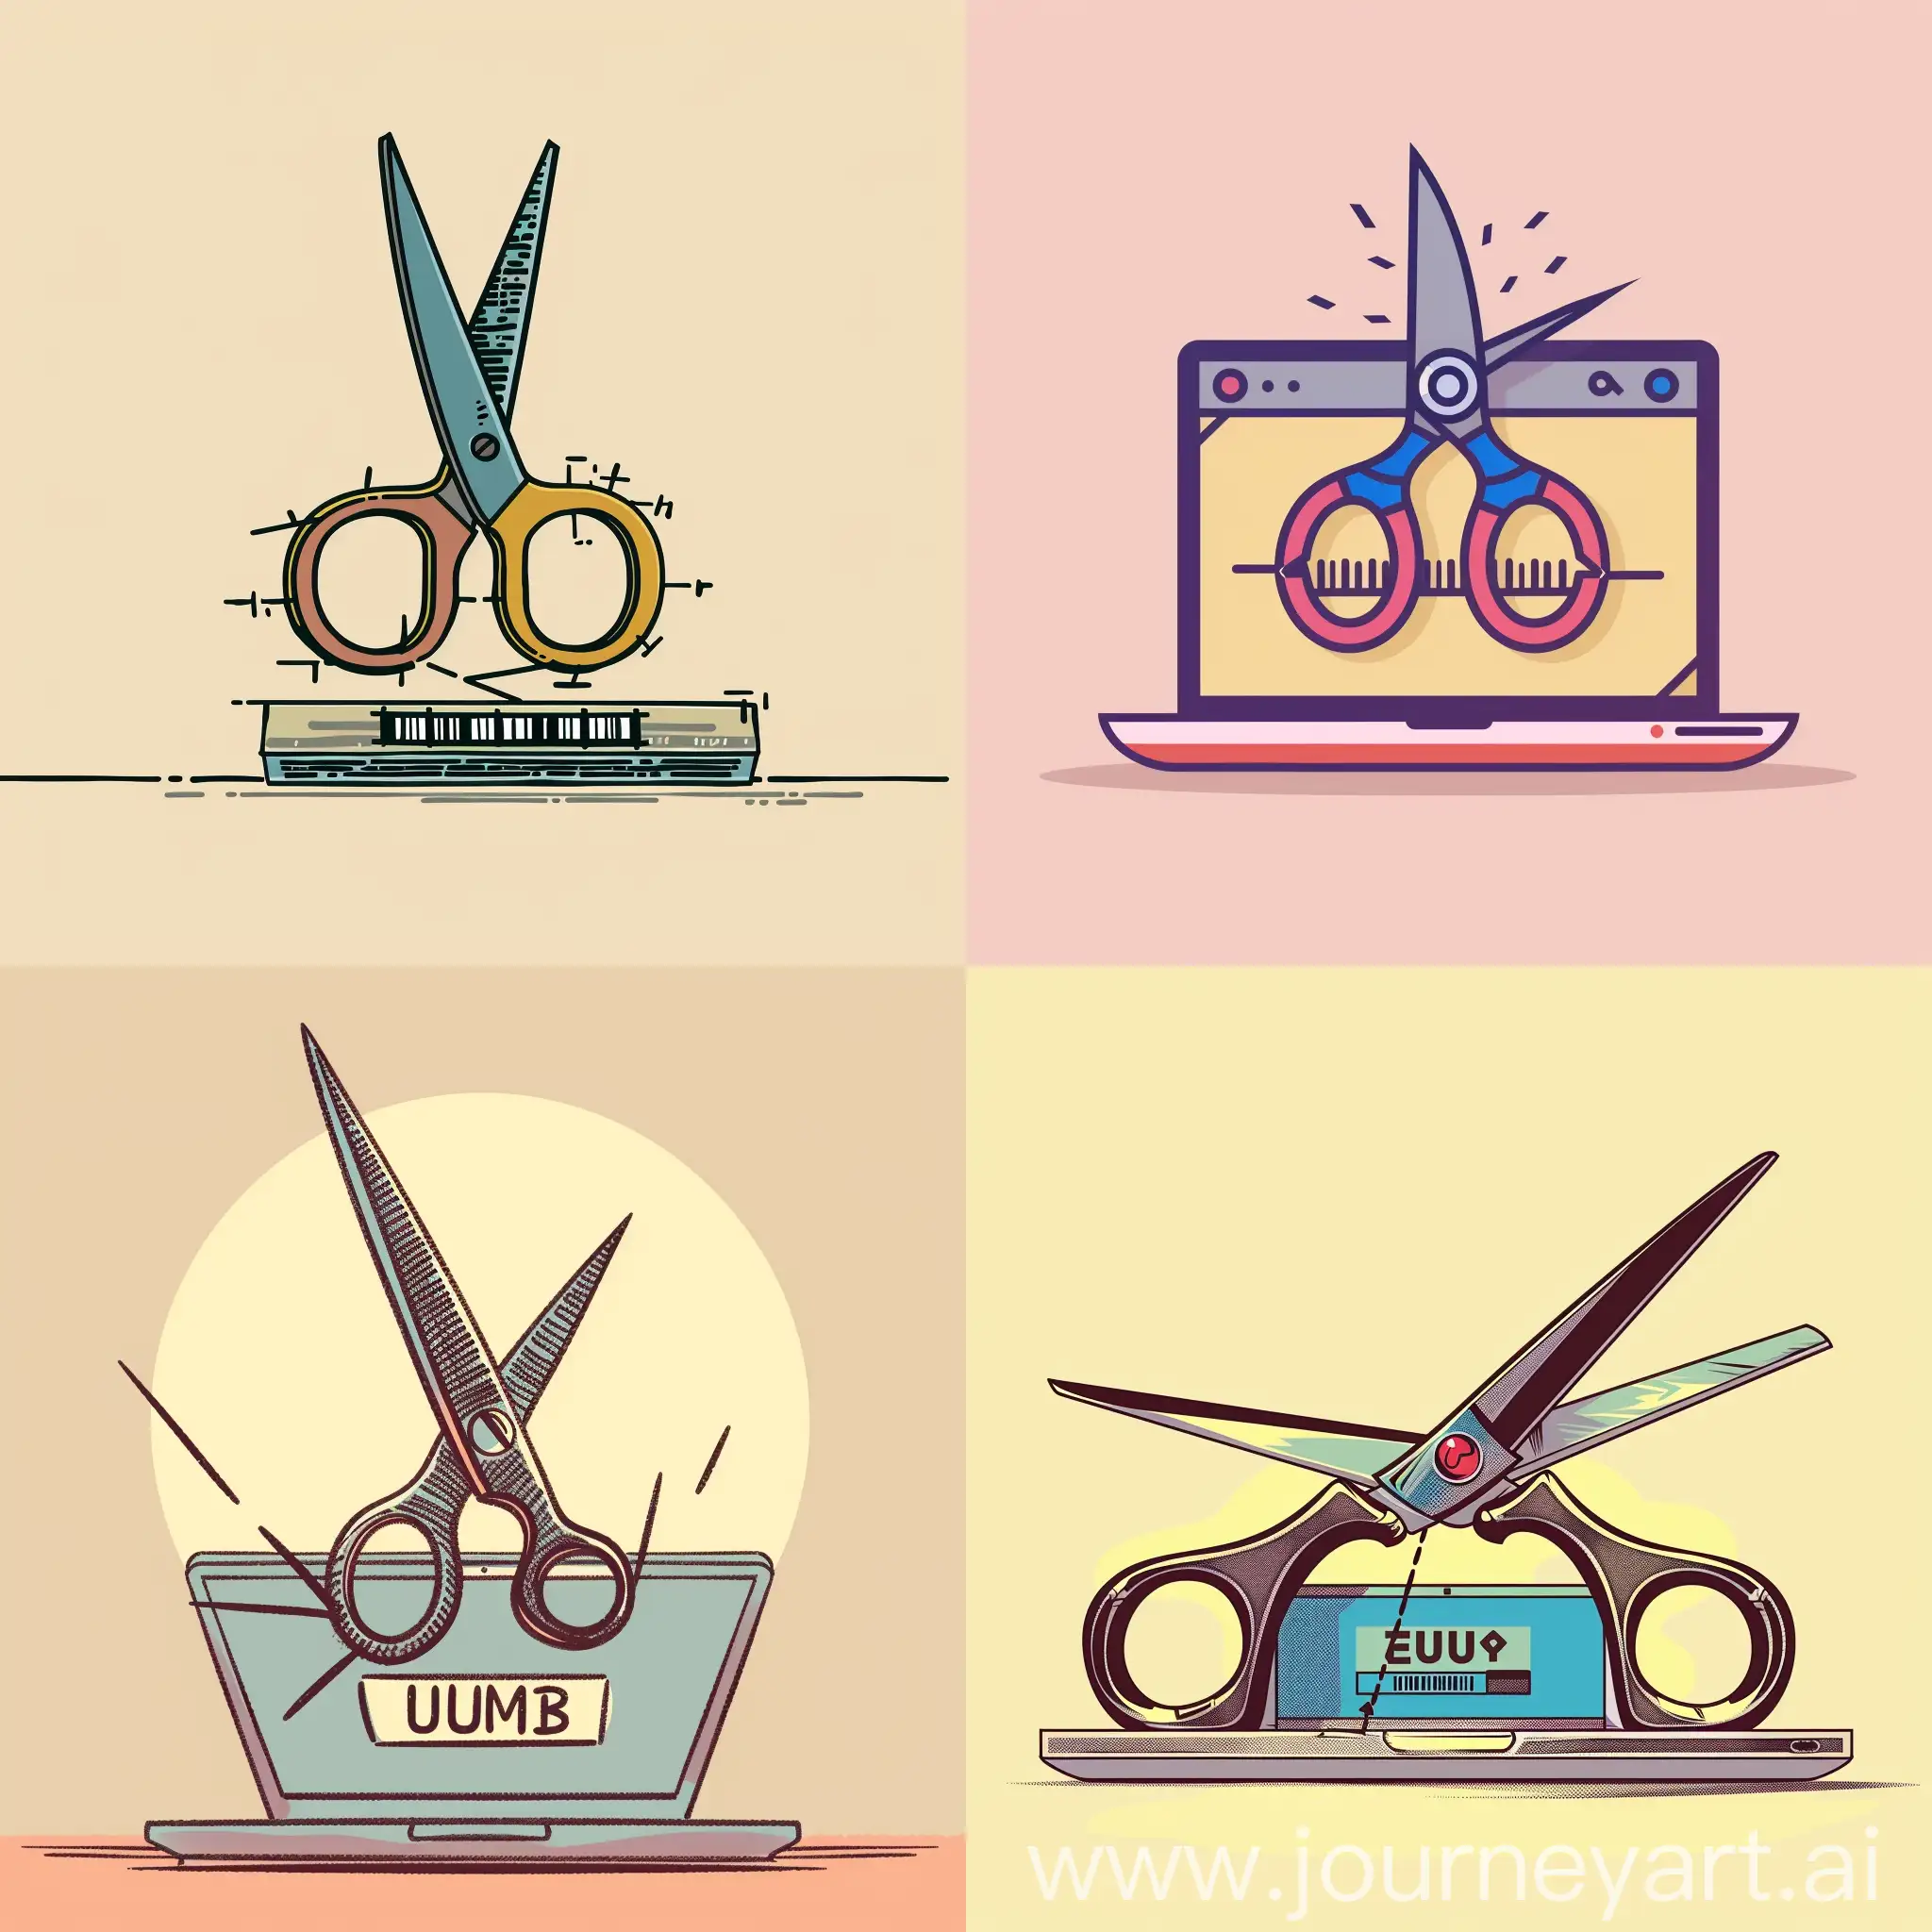 illustration a minimal graphic image about "a scissors cutting a URL address" with a simple plain color background